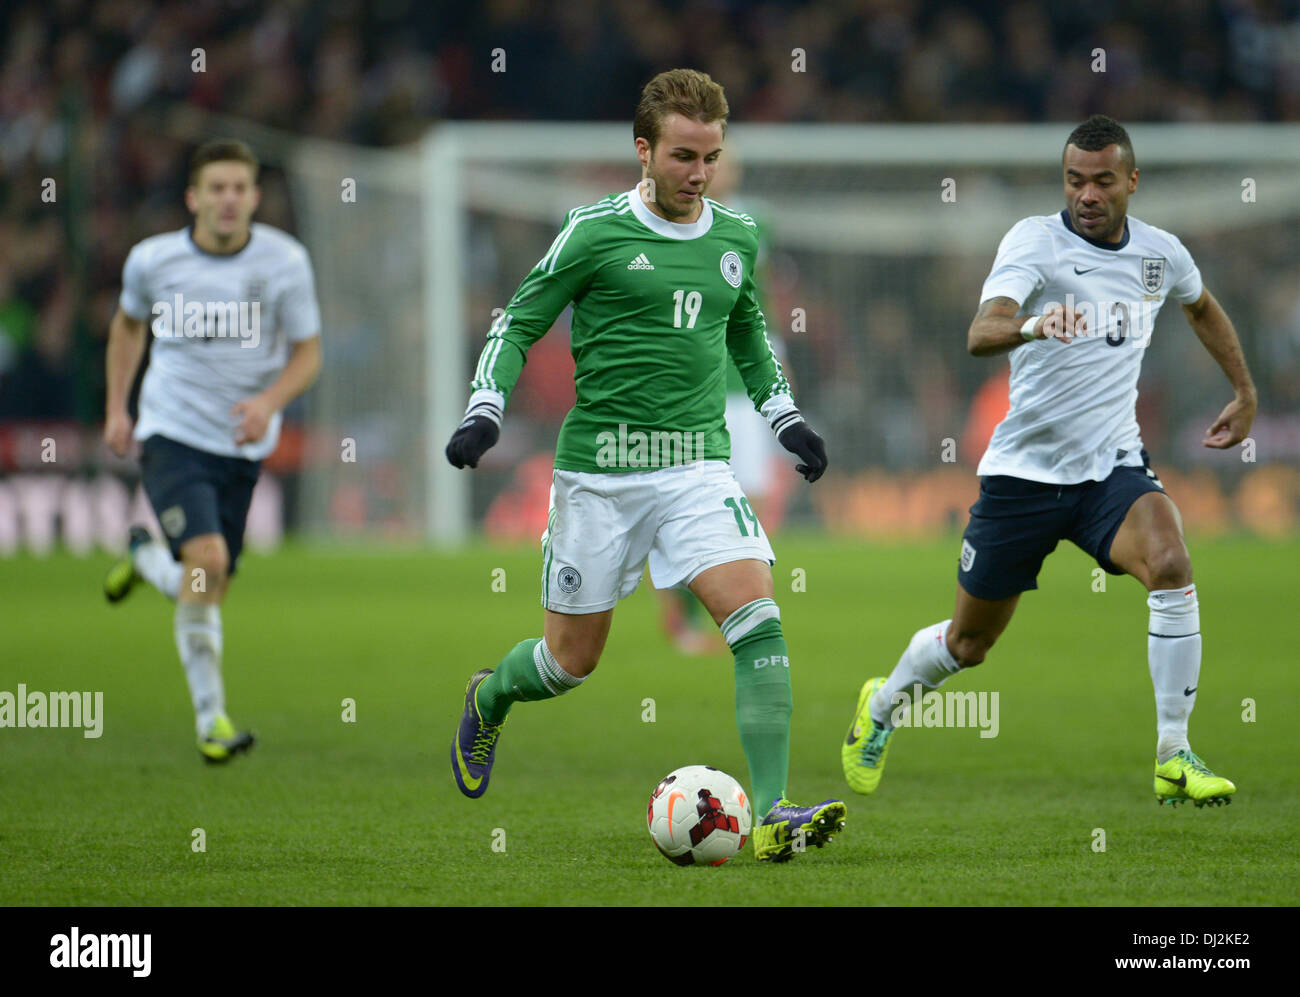 London, UK. 19th Nov, 2013. England's Ashley Cole (R) and Germany's Mario Goetze (C) vie for the ball during the friendly soccer match between England and Germany at Wembley Stadium in London, England, 19 November 2013. Photo: Andreas Gebert/dpa/Alamy Live News Stock Photo